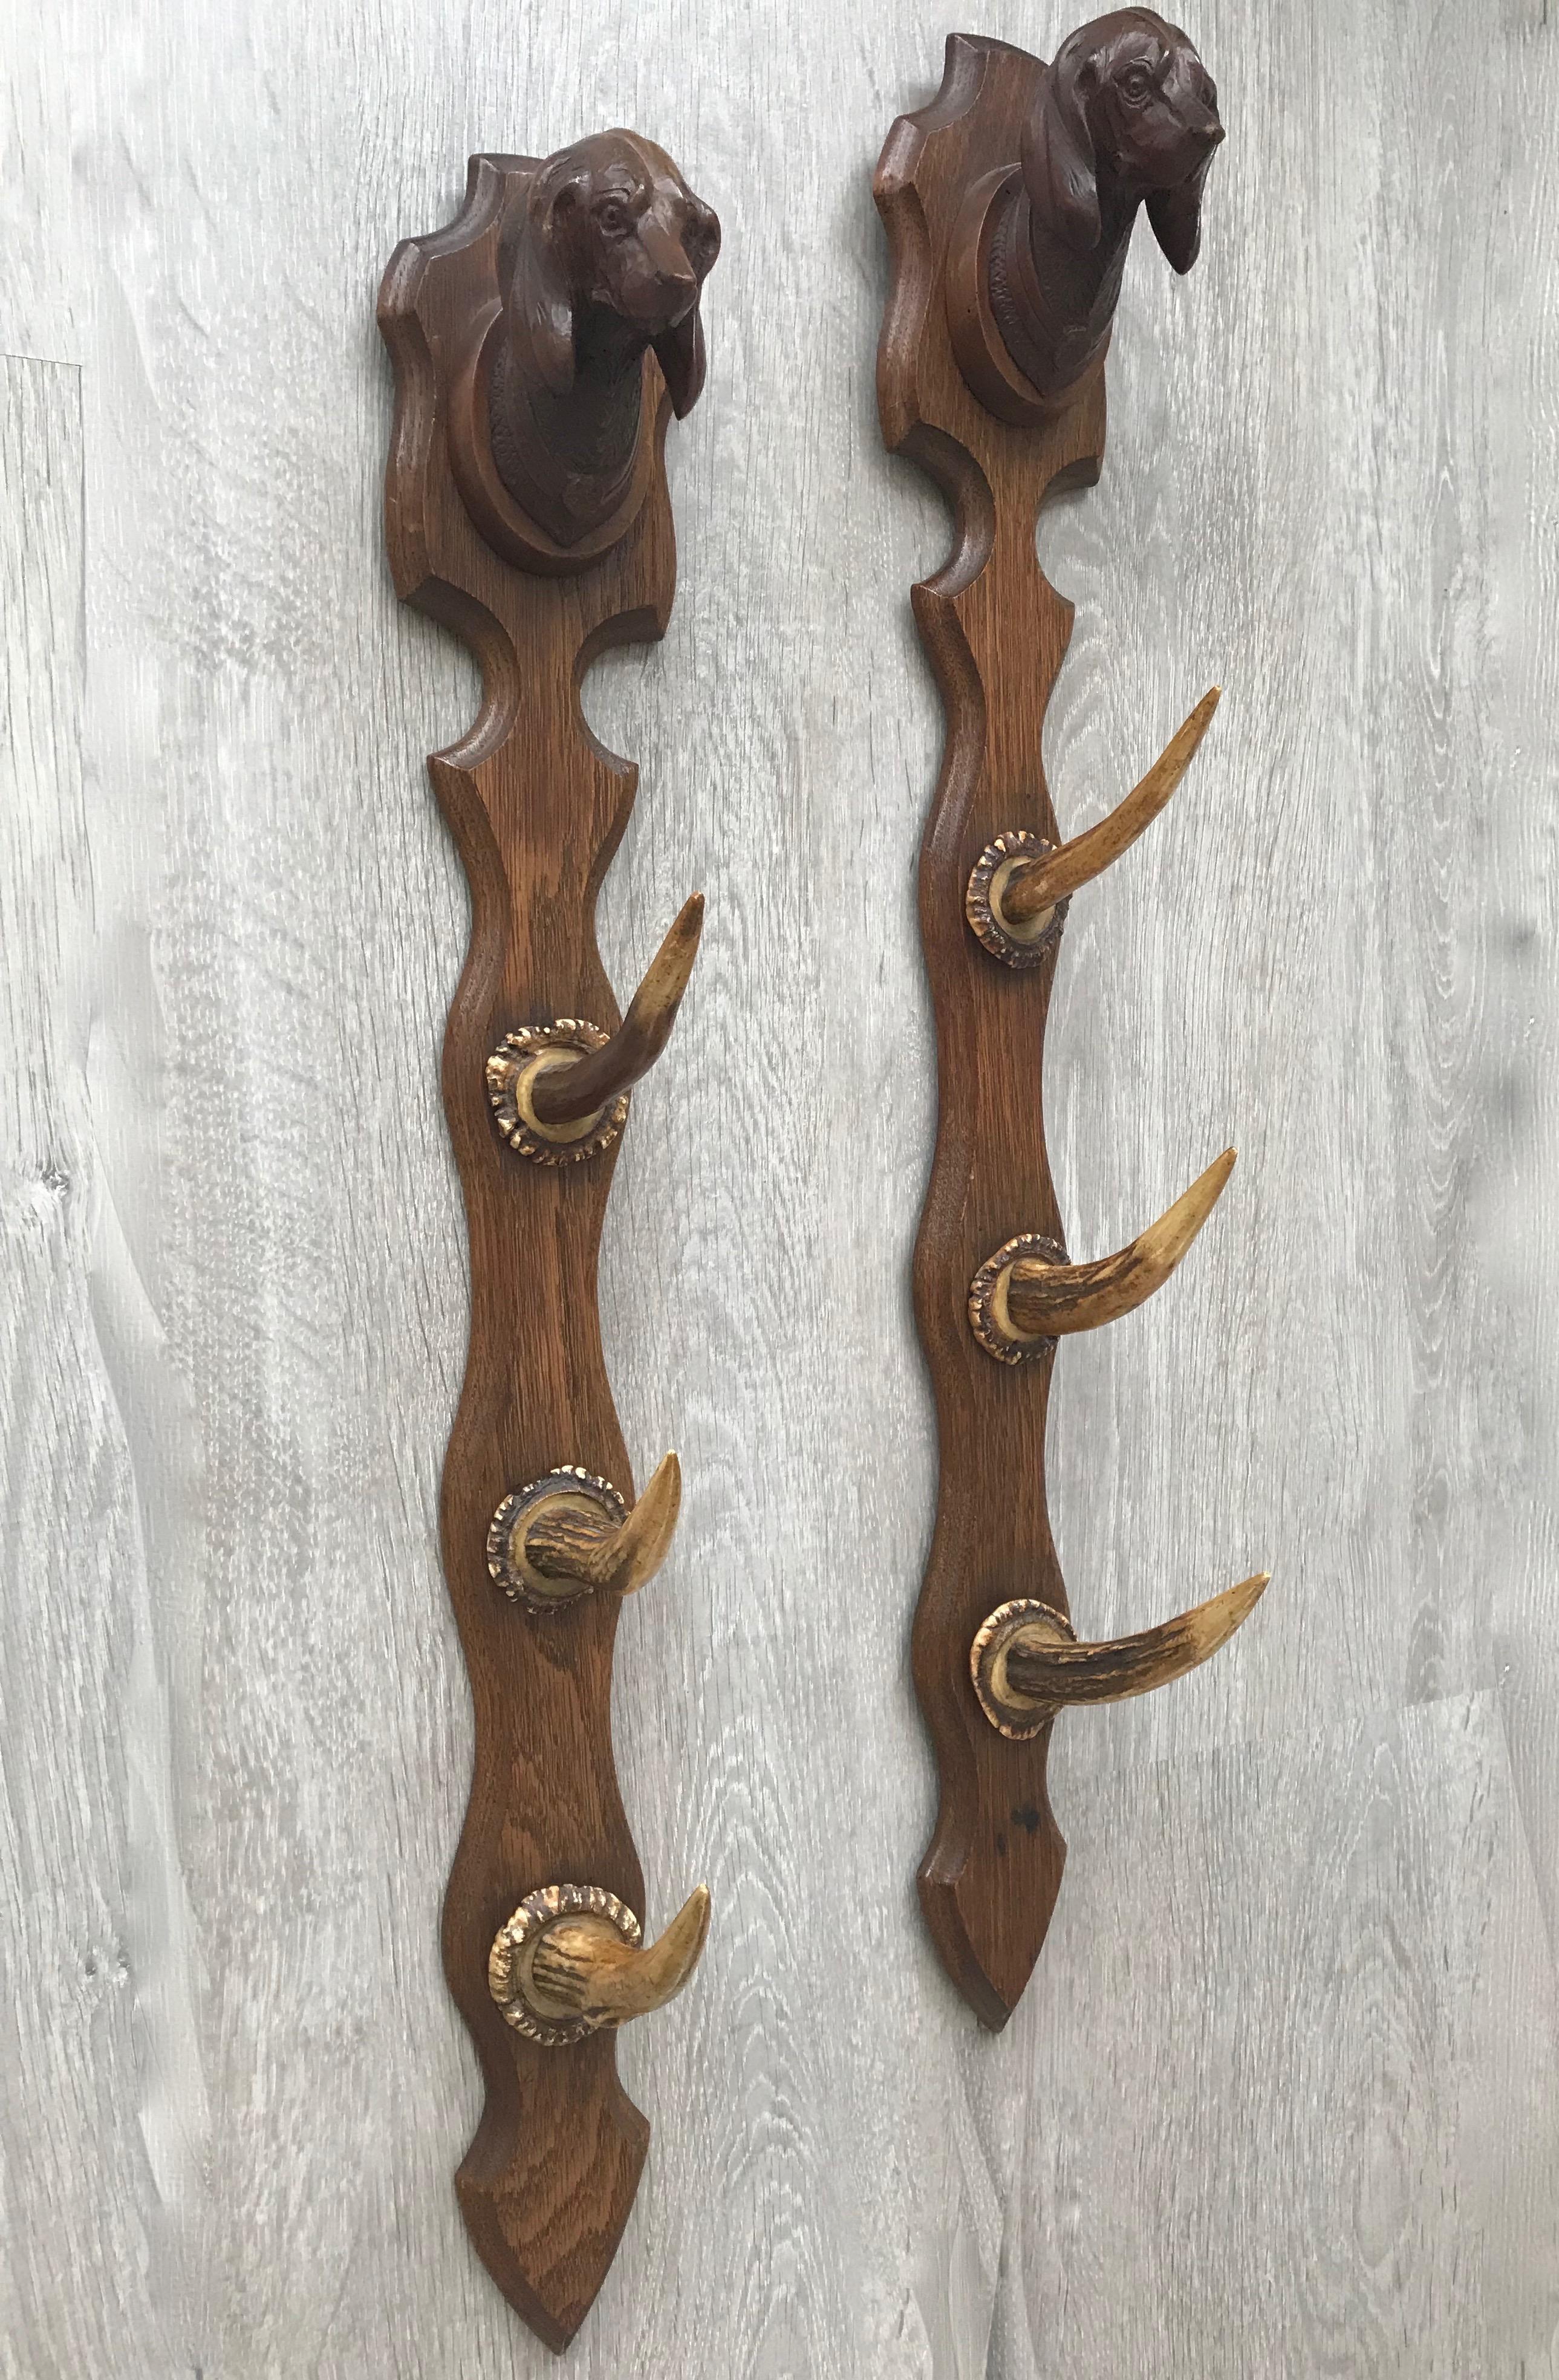 Unique rifle rack with very cool and highly decorative pair of dachshund sculptures.

This highly decorative and great condition set for wall mounting together create the perfect rifle rack. On top they each come with a beautiful and all hand-carved